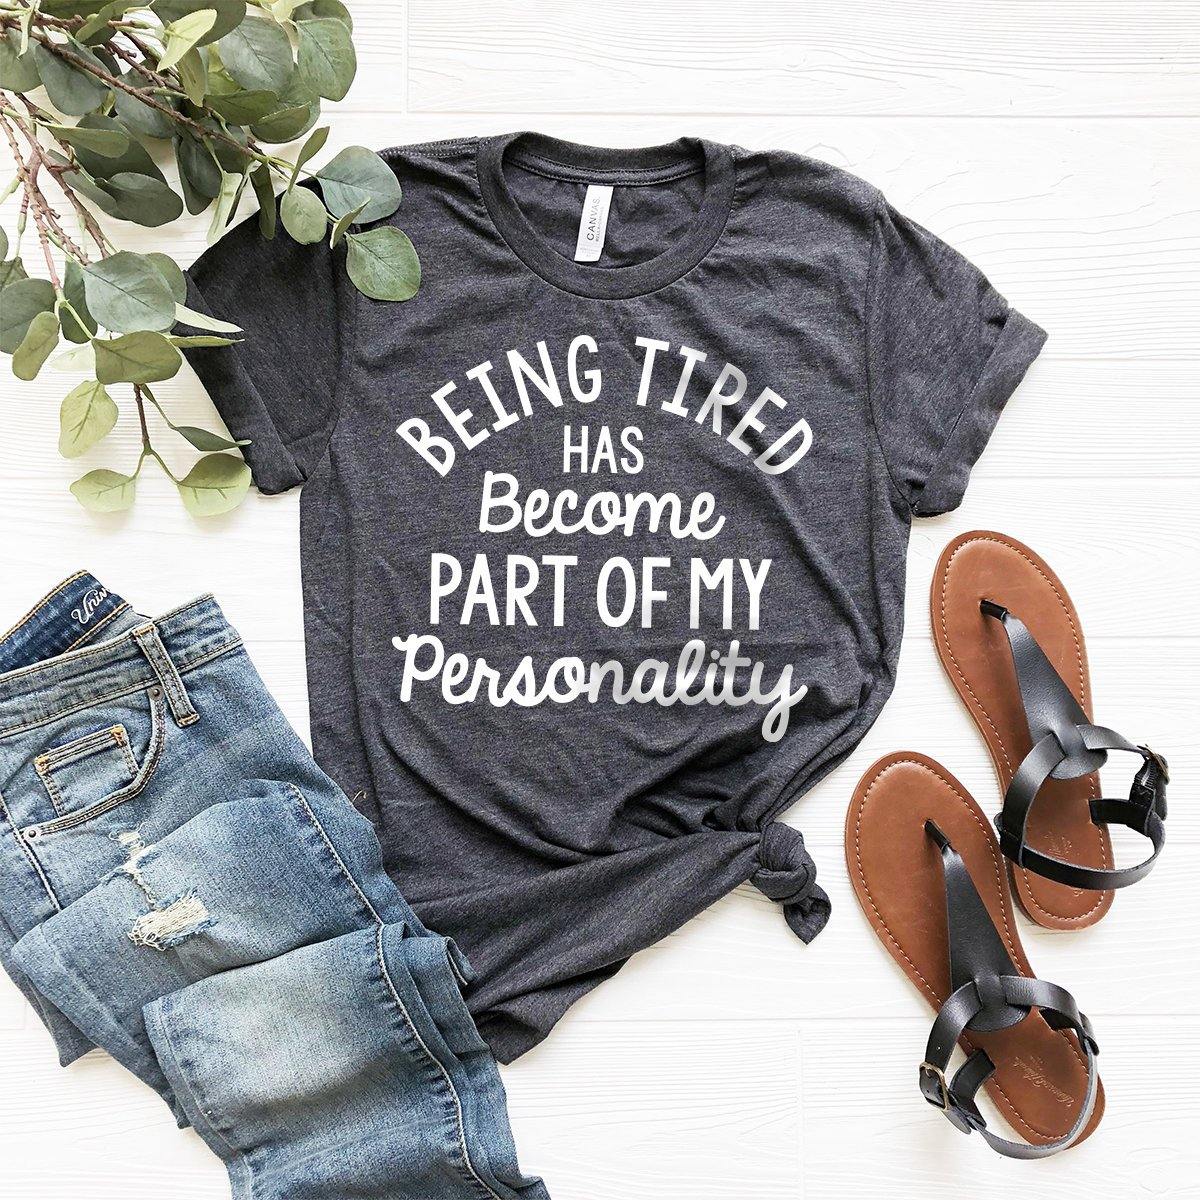 New Mom Shirt, Tired Mom T-Shirt, Funny Sarcastic Tee, Sarcastic Shirt, Sarcasm Shirt, Being Tired Has Become Part Of My Personality T Shirt - Fastdeliverytees.com